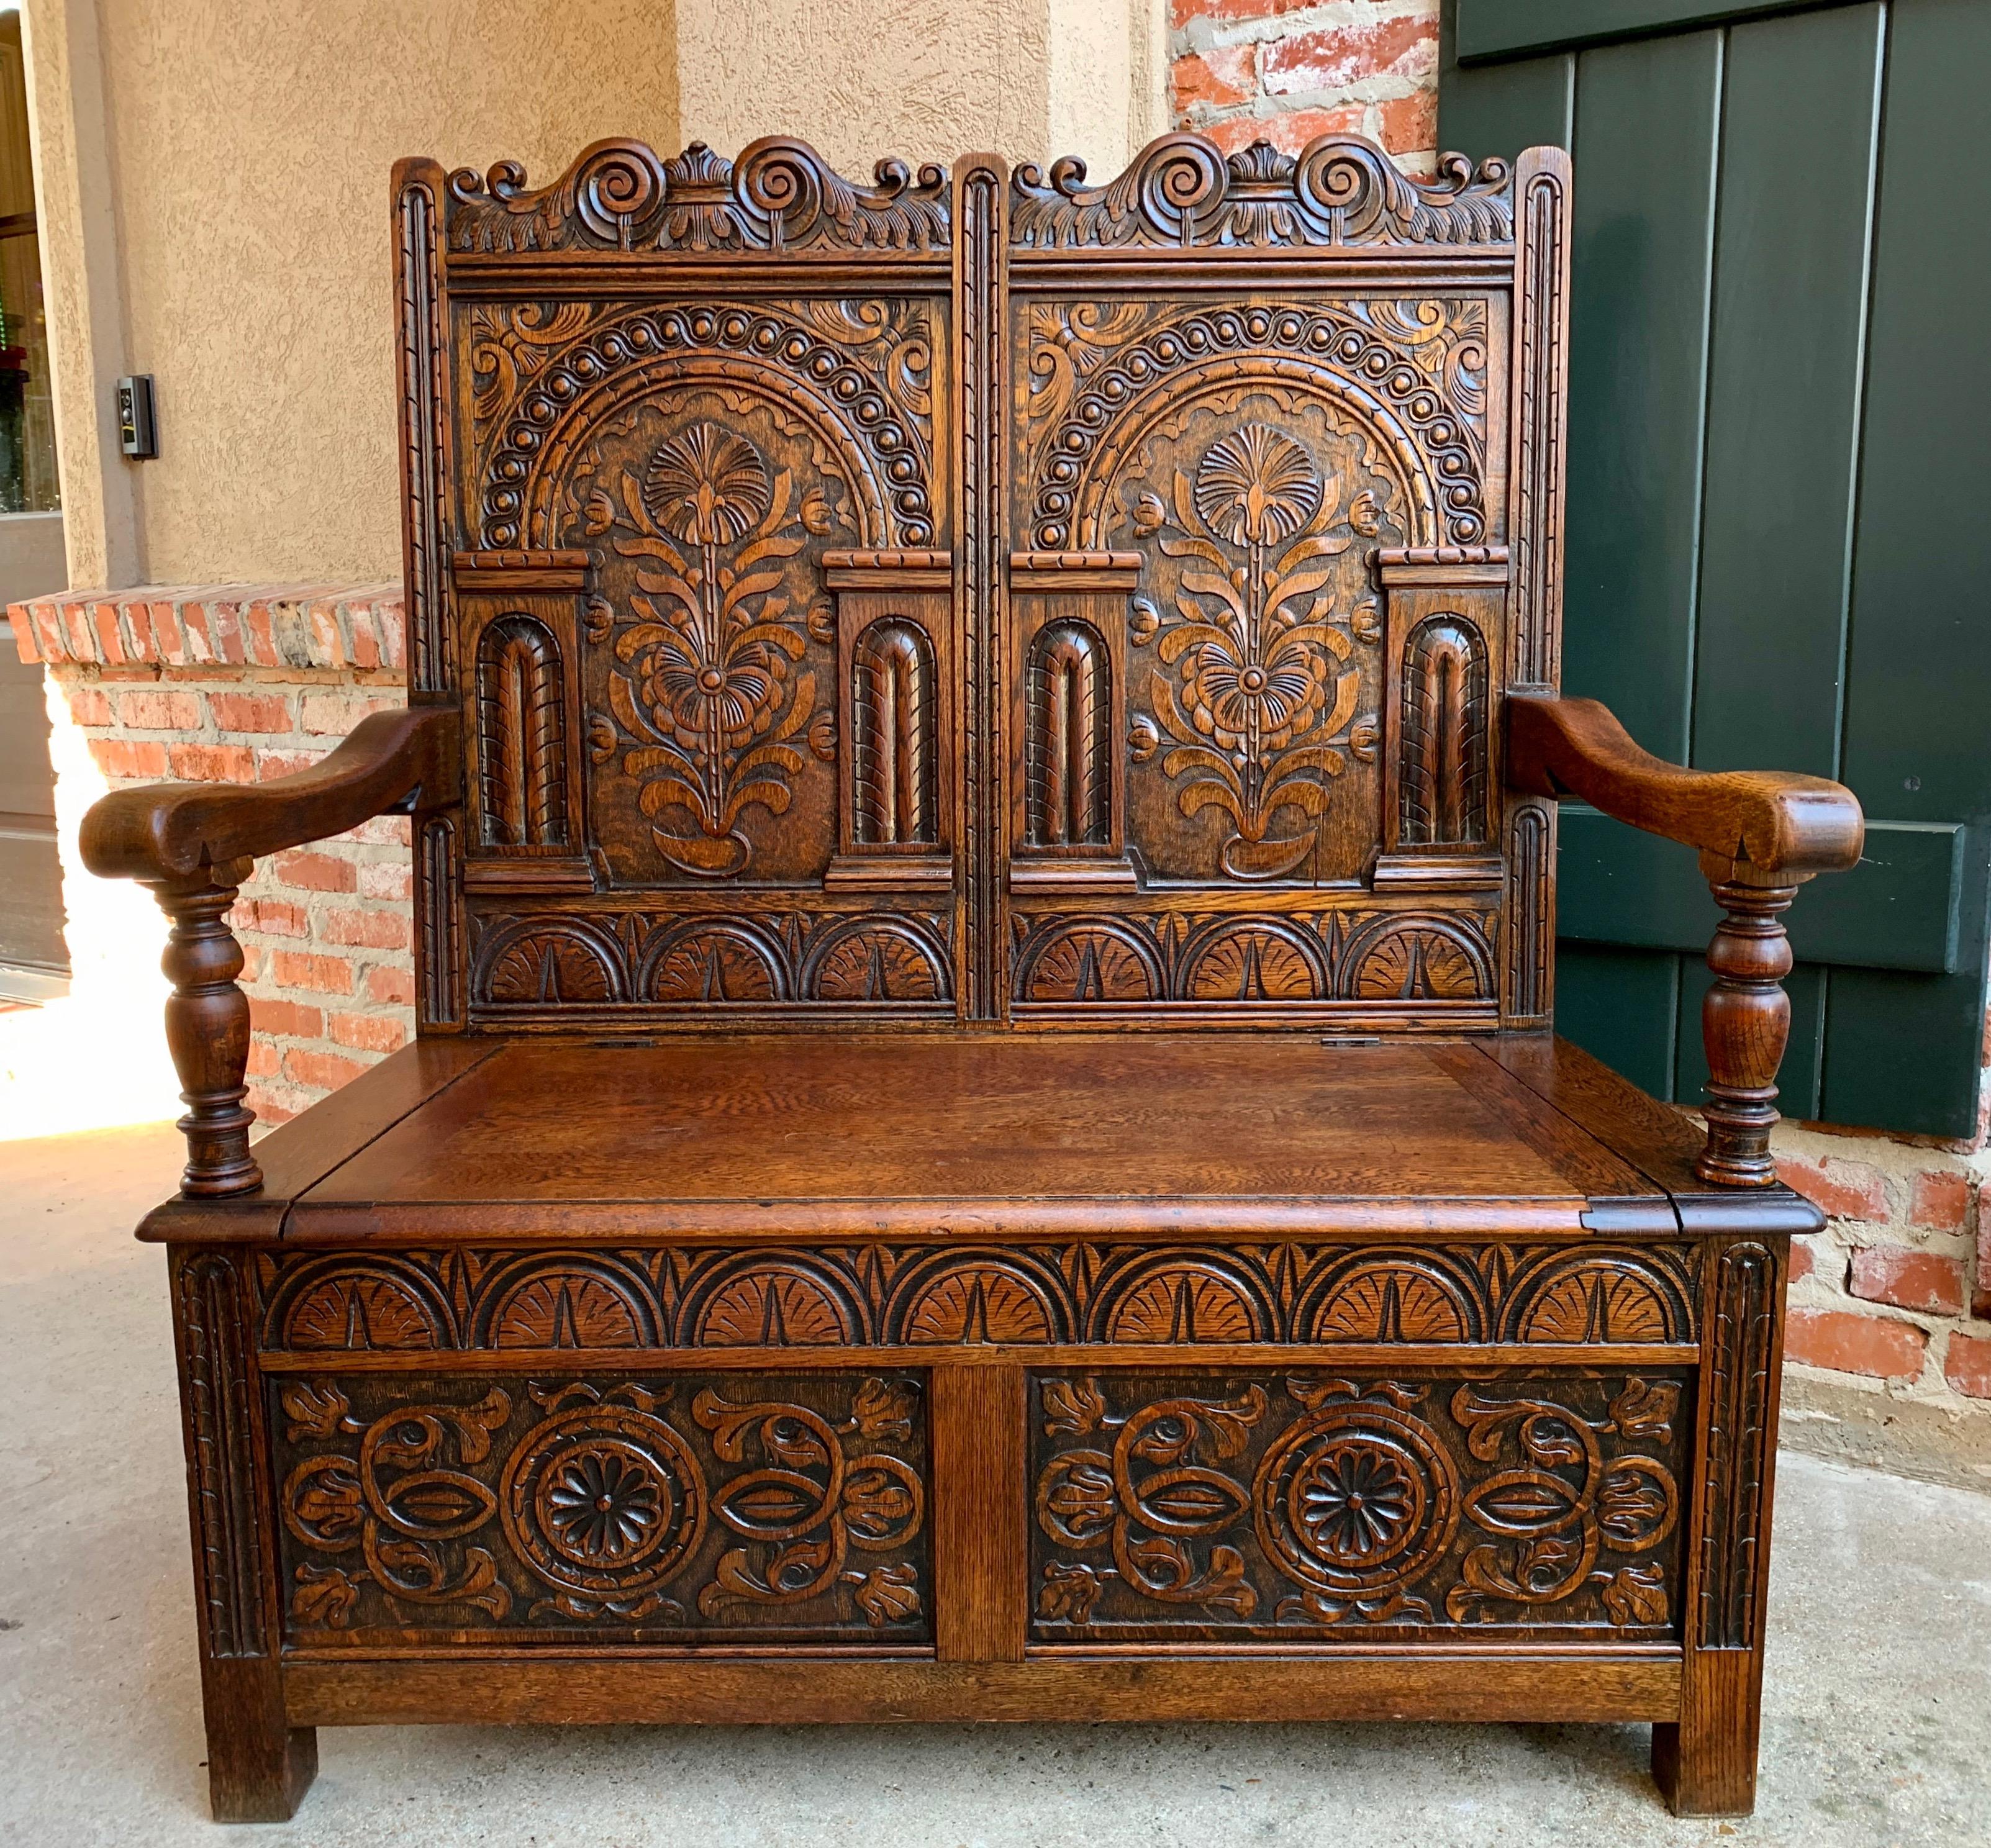 Direct from England, a lovely carving completely covers this versatile antique English hall bench!
~3.5 ft. length, high back with scalloped carved upper and fully carved dual panels in a traditional English motif~
~Lower front bench panels also